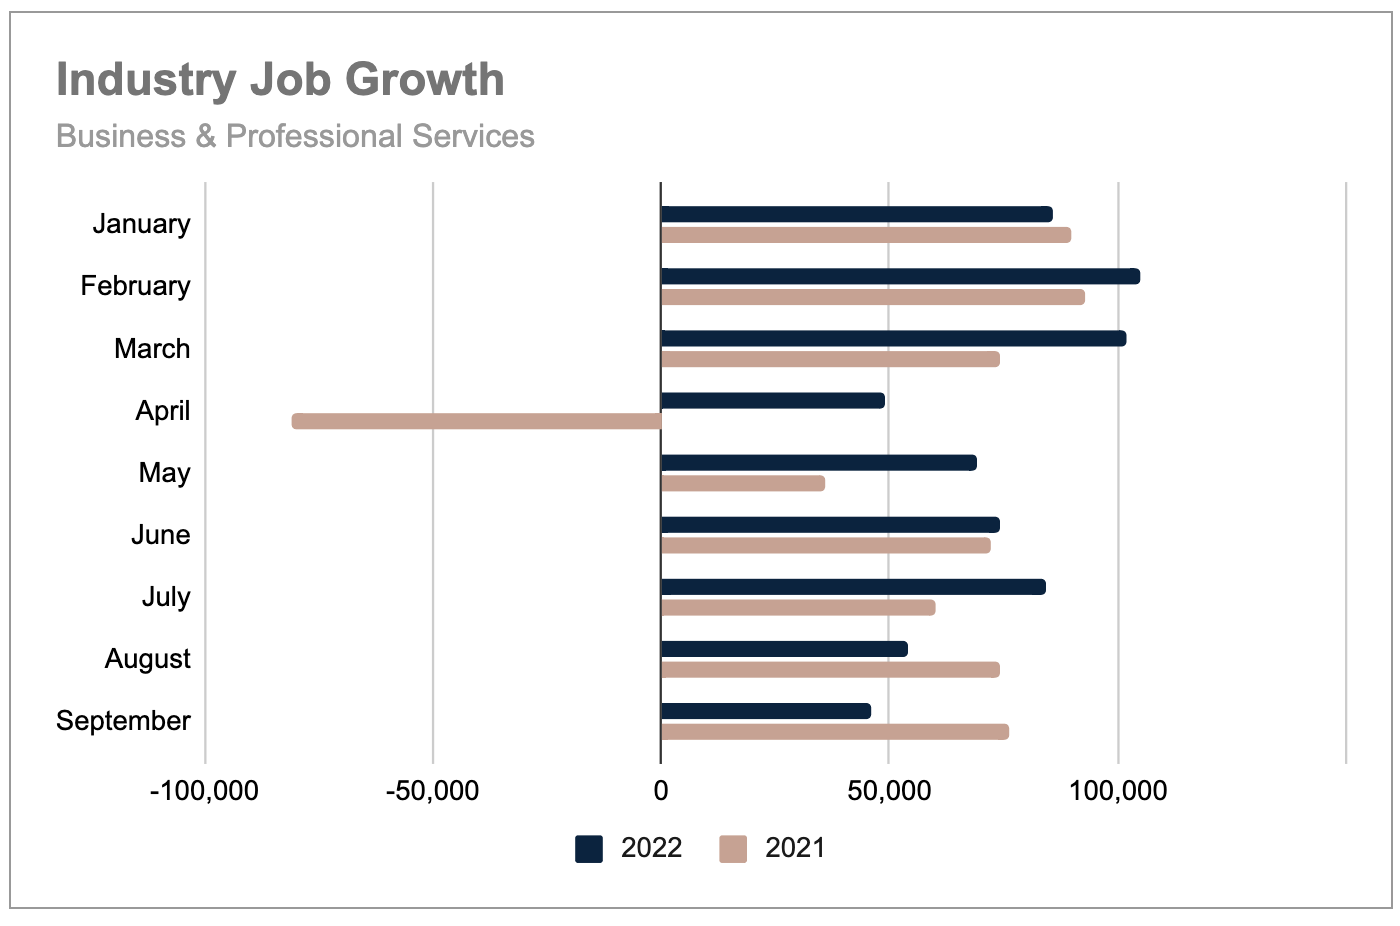 Industry job growth, business and professional services